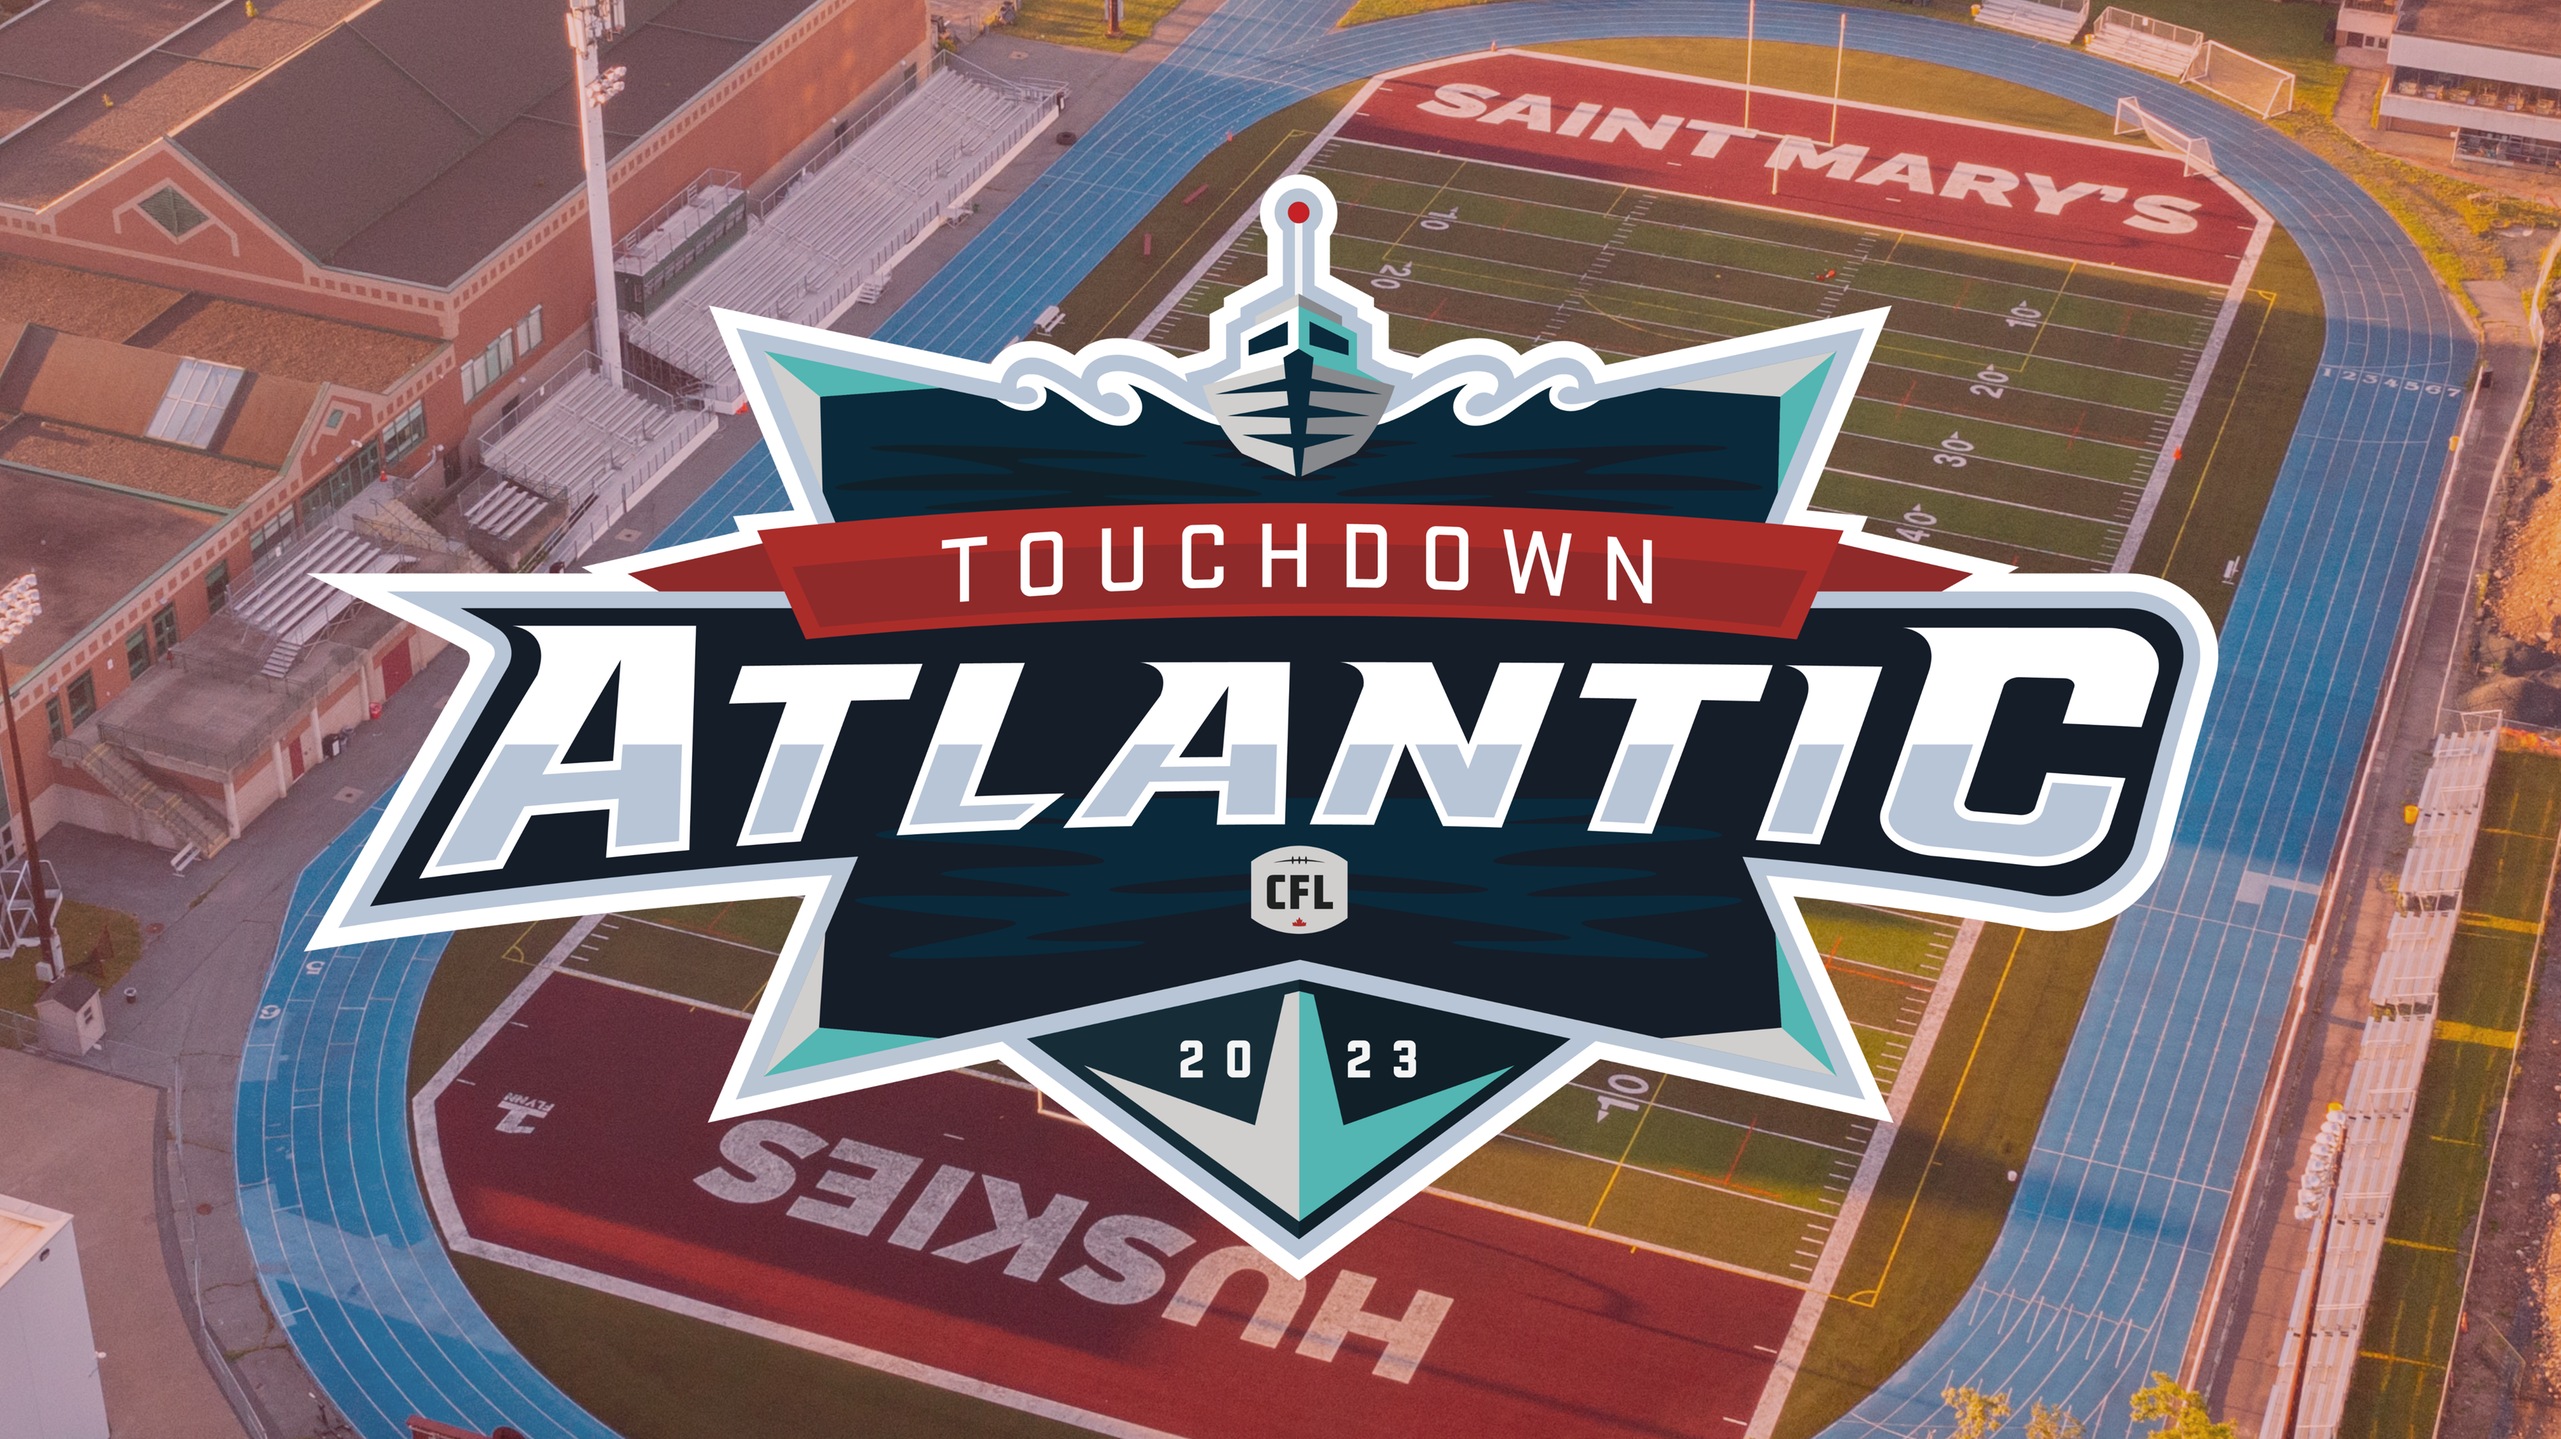 Saint Mary's to host CFL's Touchdown Atlantic 2023